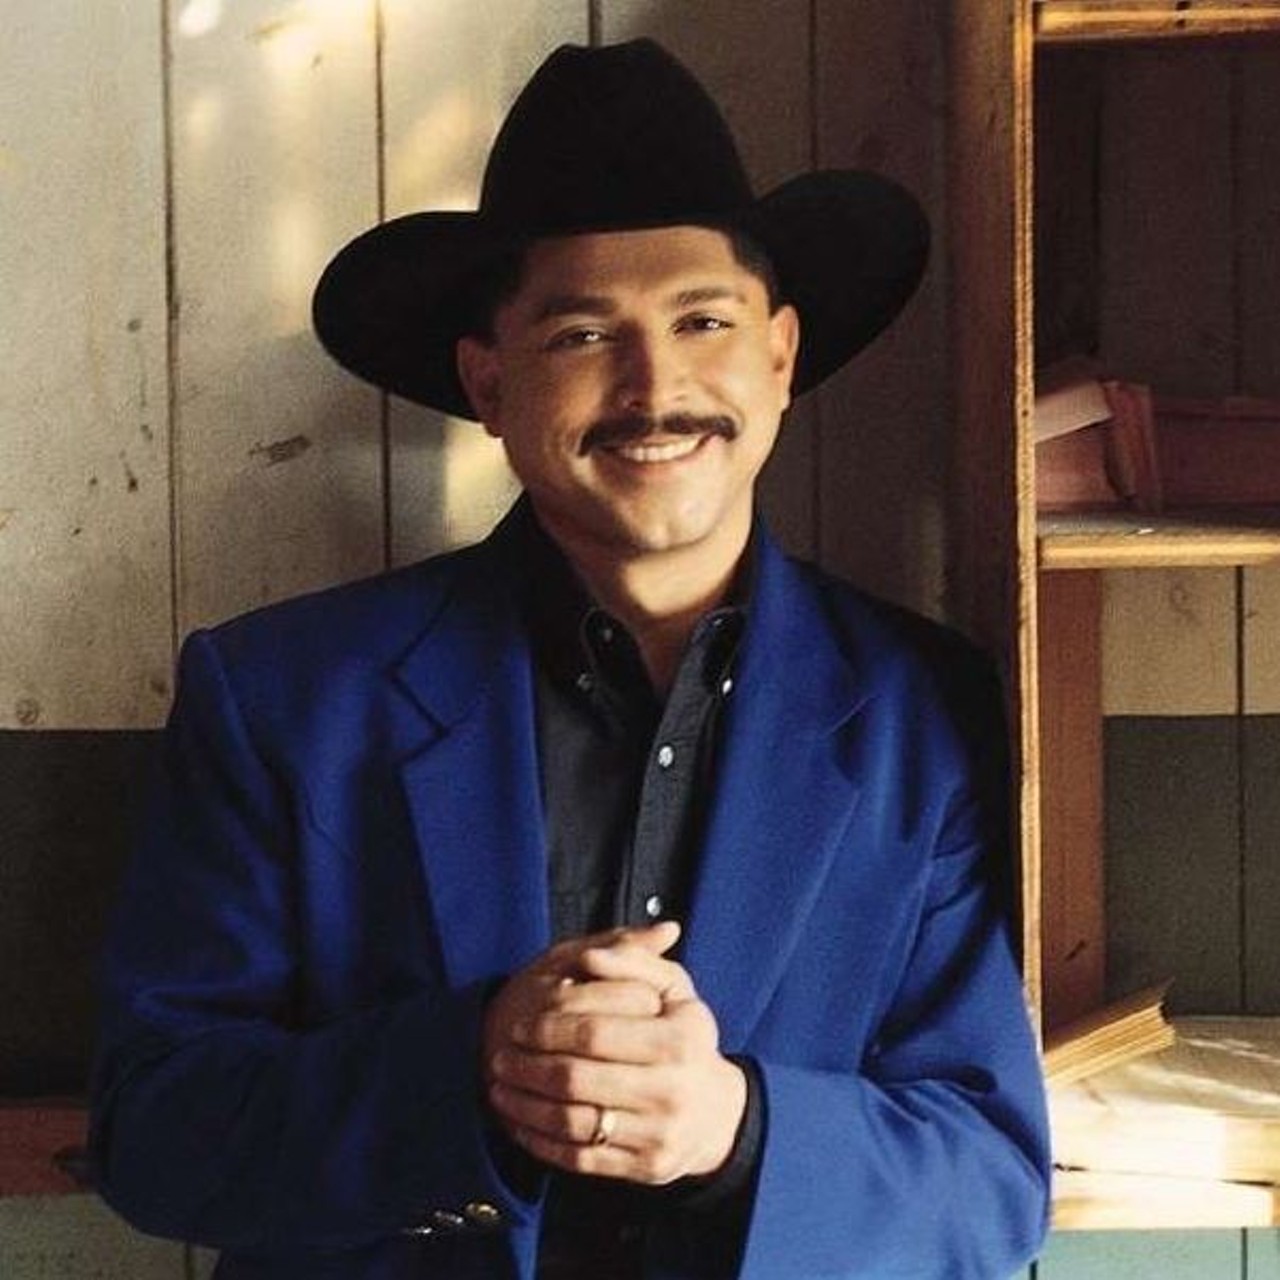 Emilio Navaira
San Antonio-born Emilio Navaira was one of the key artists who popularized Tejano music in the '90s, earning both a Grammy and Latin Grammy along the way. Although Navaira died in 2016, two of his sons, Emilio IV and Diego, went into the family business, recording and touring with the rock band the Last Bandoleros.
Photo via Facebook / Emilio Navaira Official